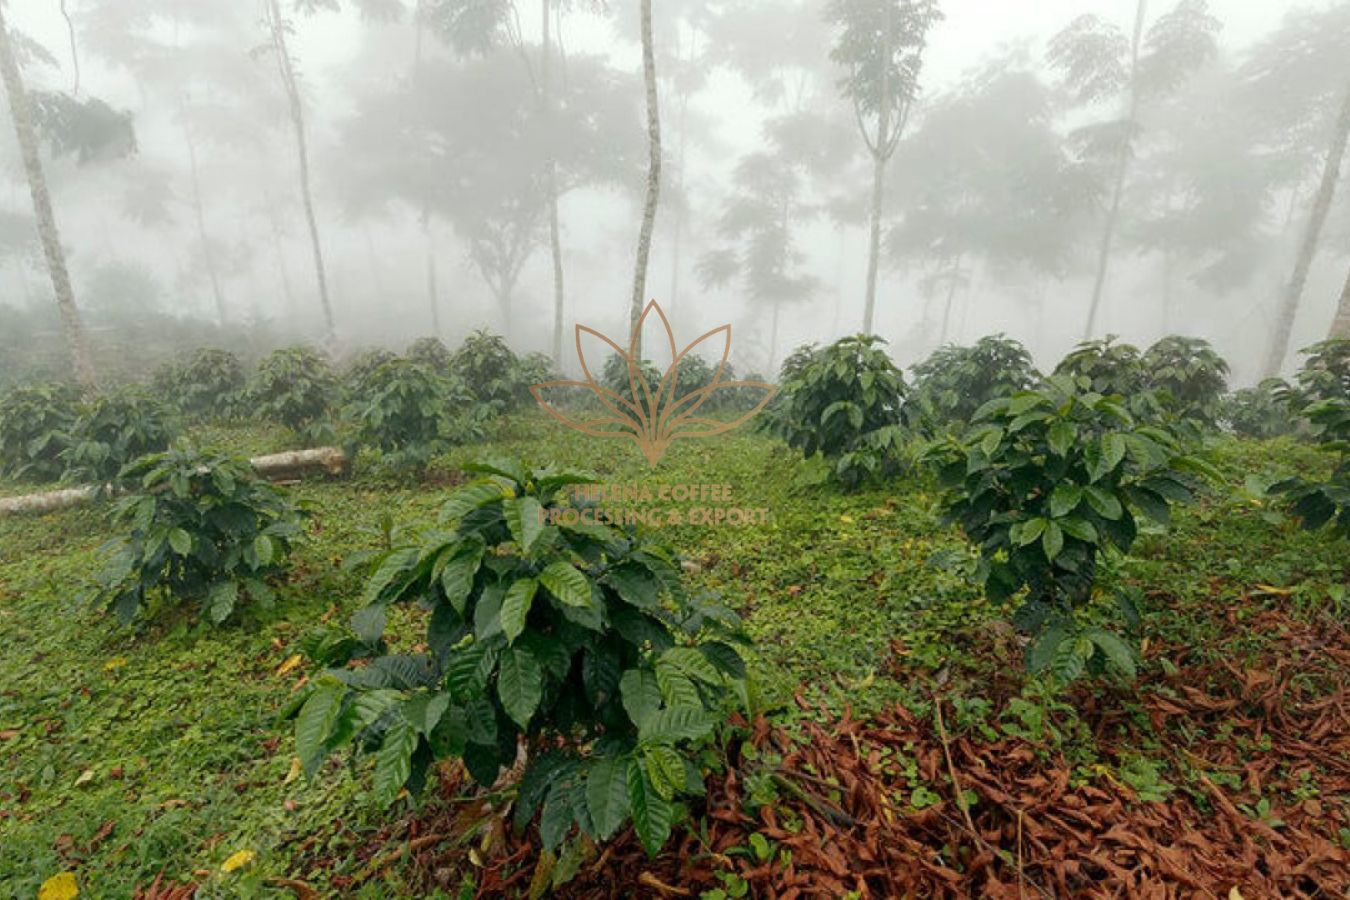 Green Coffee Supplier With Shade-Grown Coffee